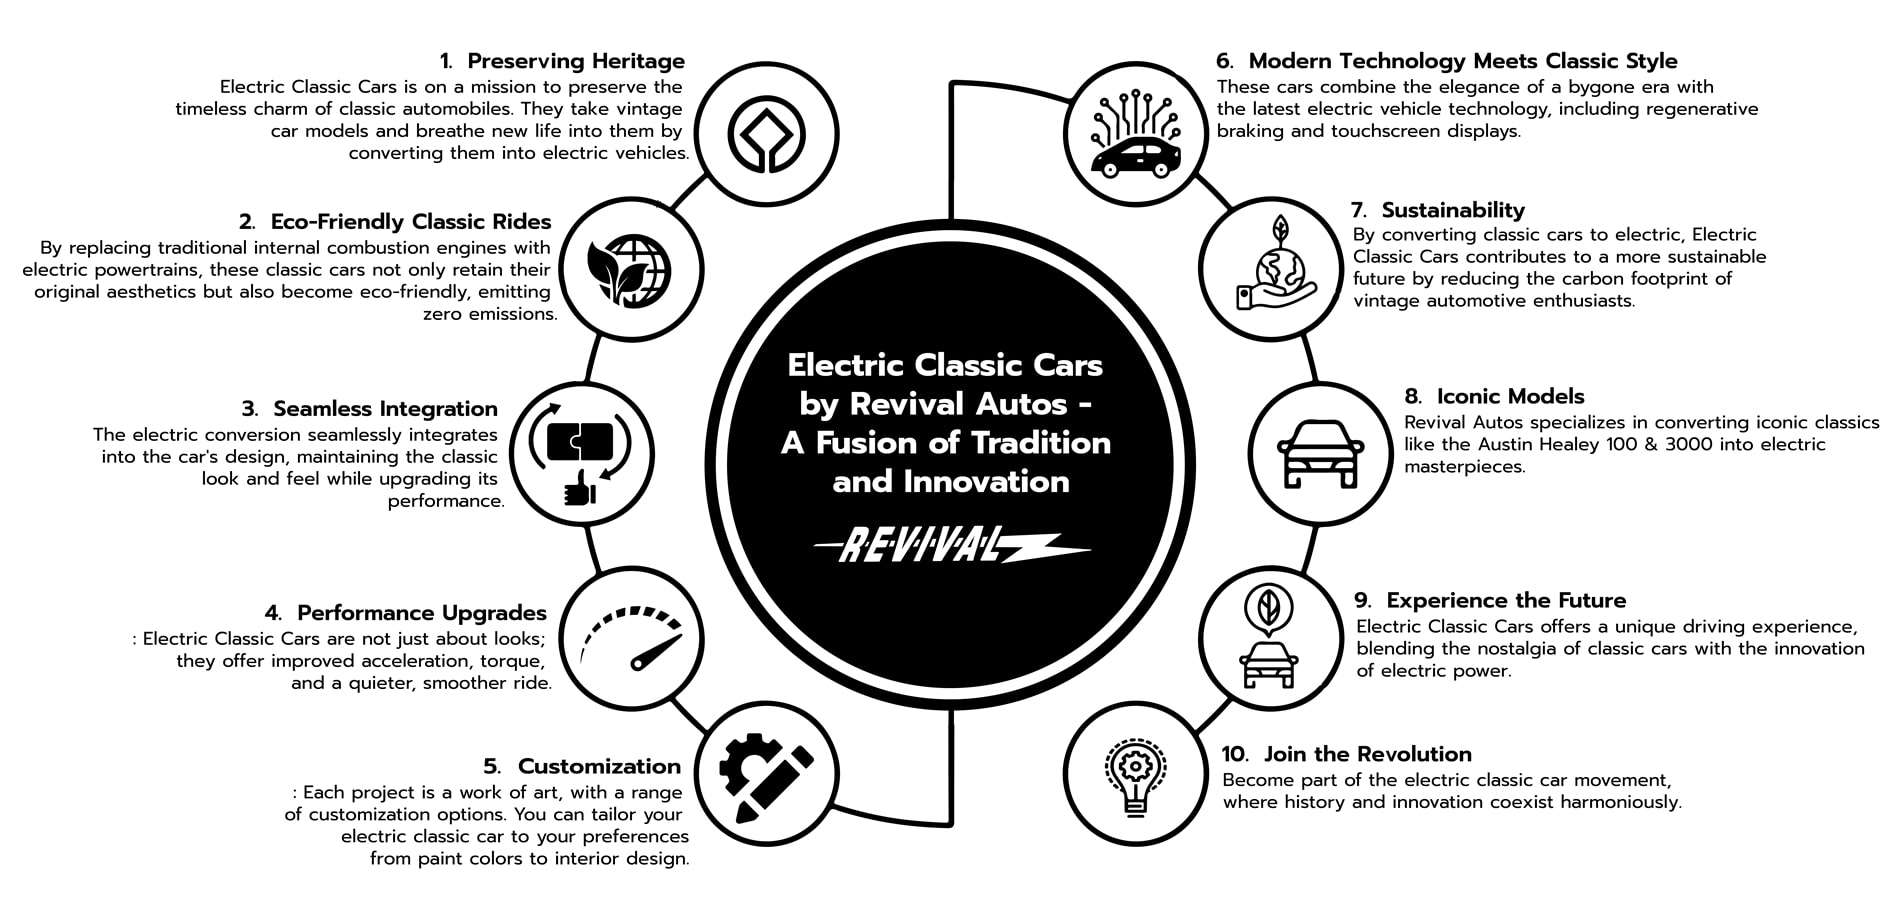 Electric Classic Cars by Revival Autos - Vintage Car Conversion to Electric Vehicles